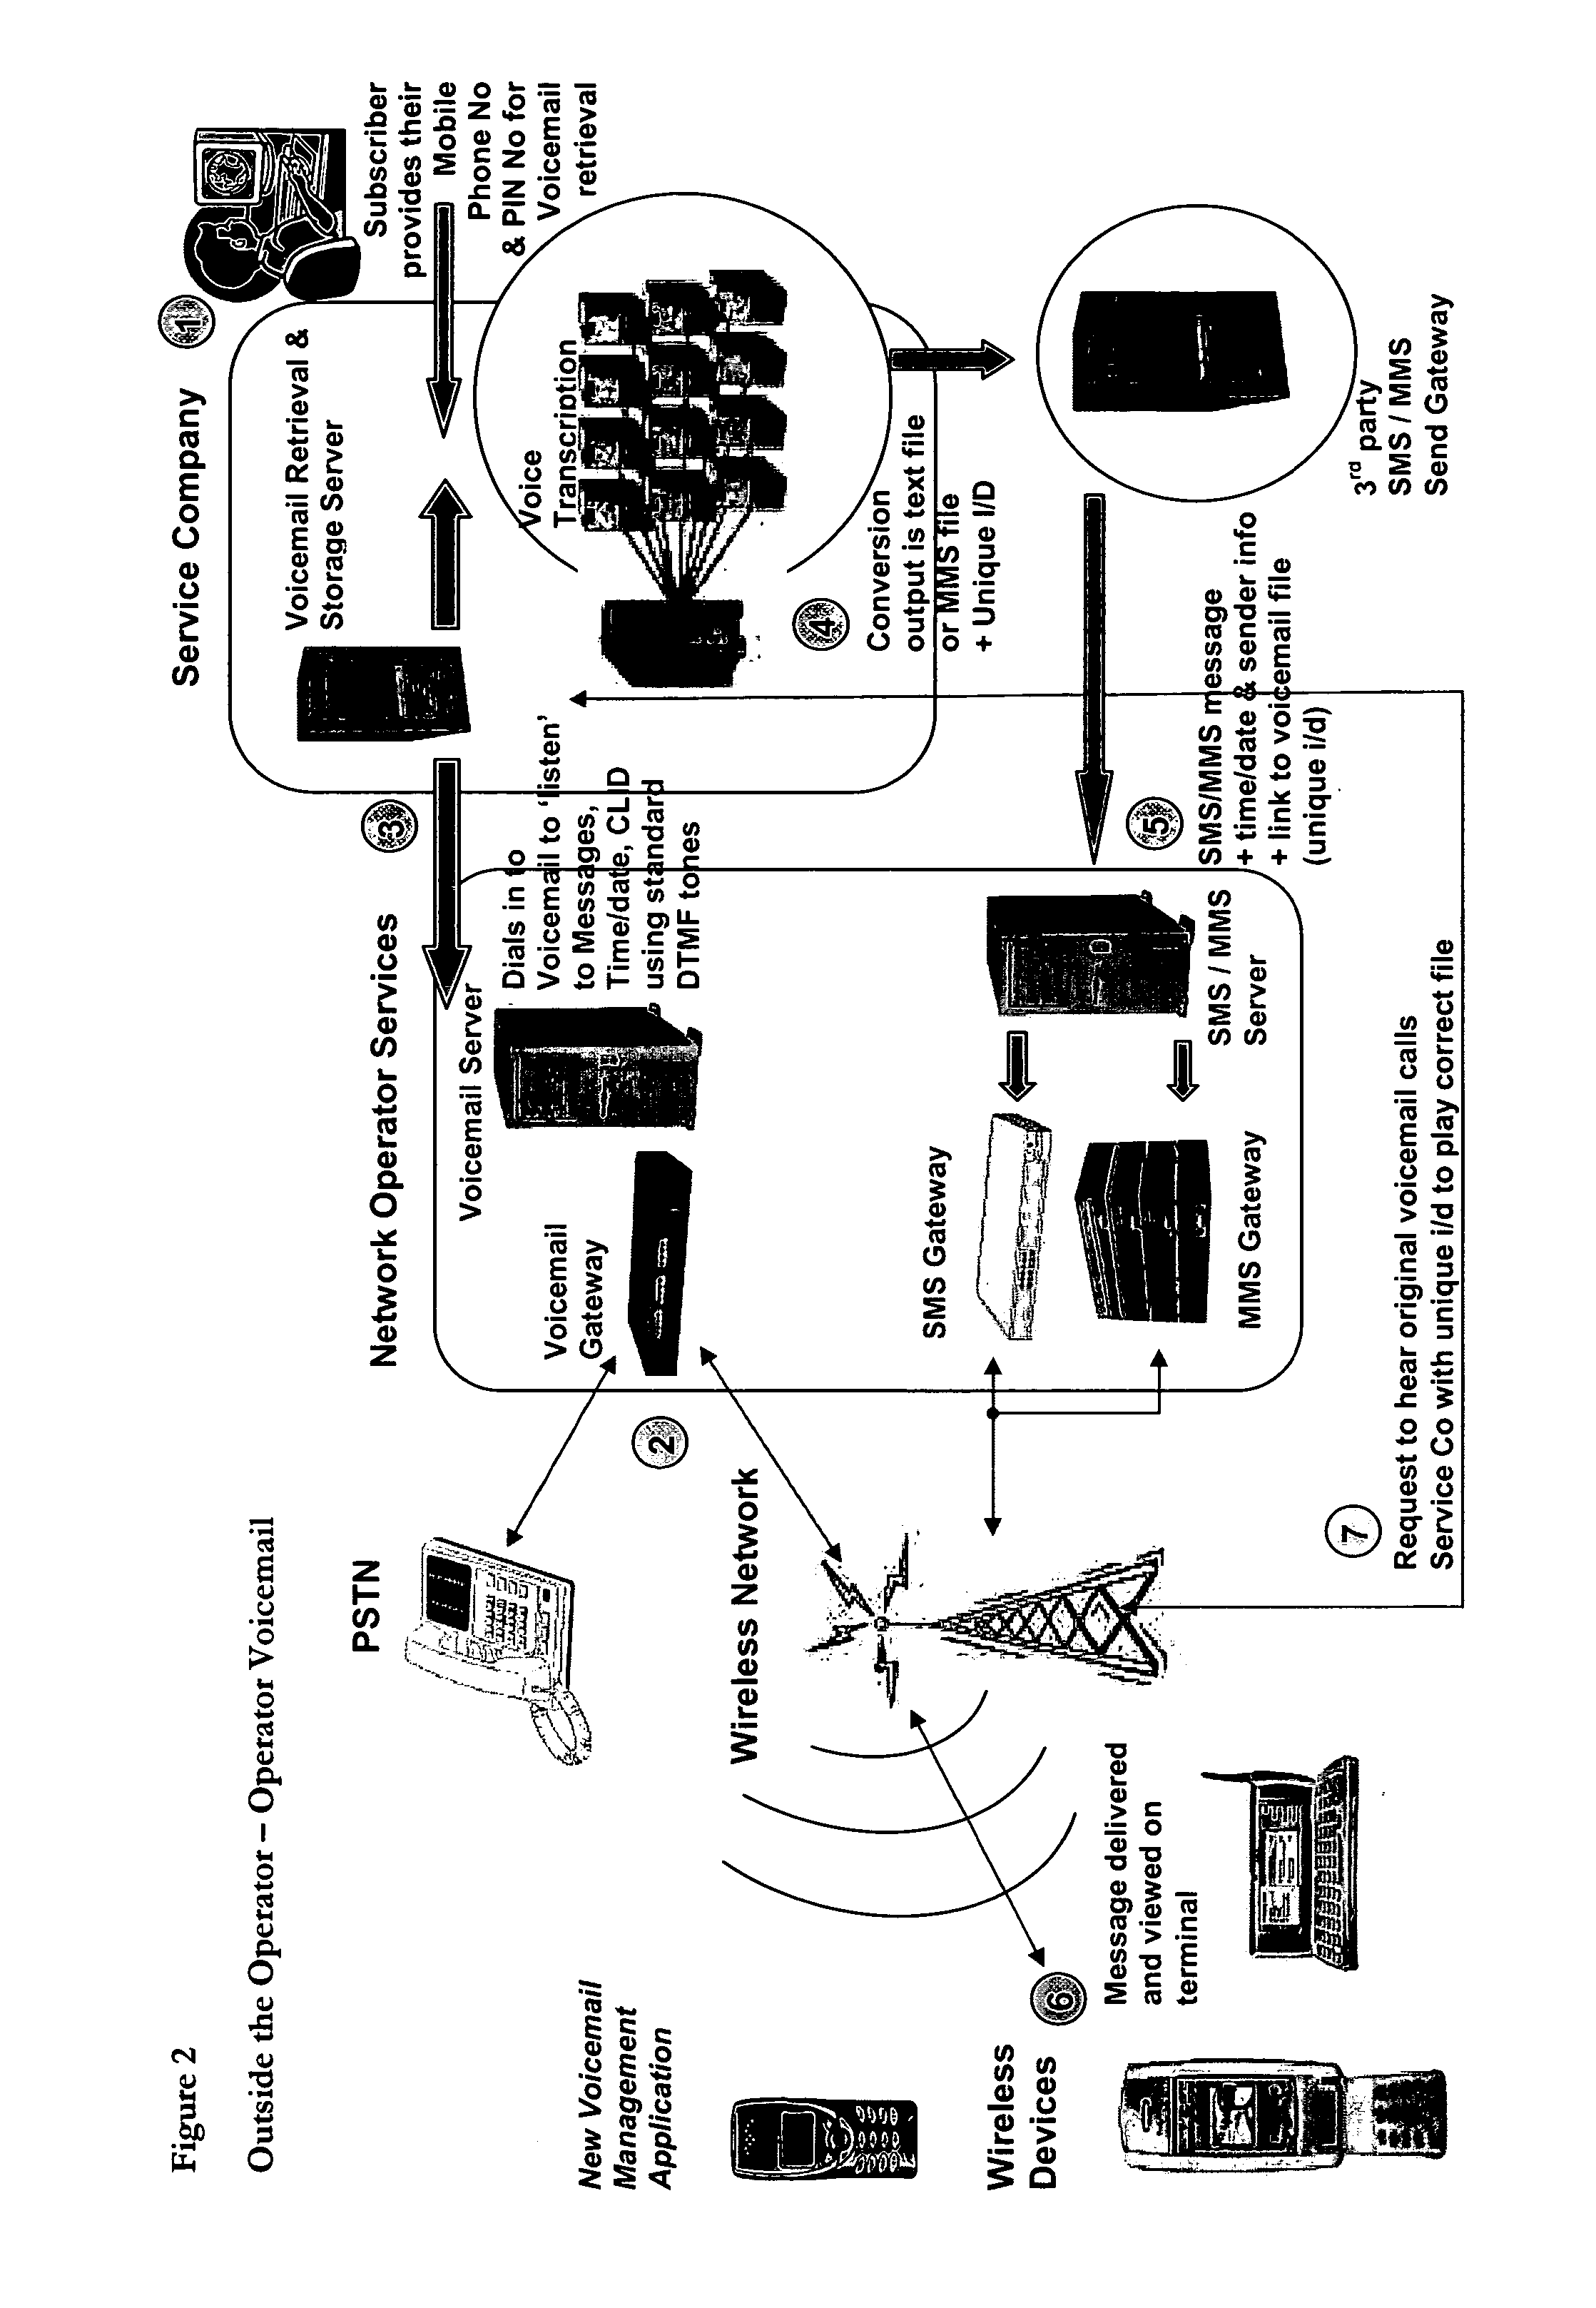 Method of managing voicemails from a mobile telephone